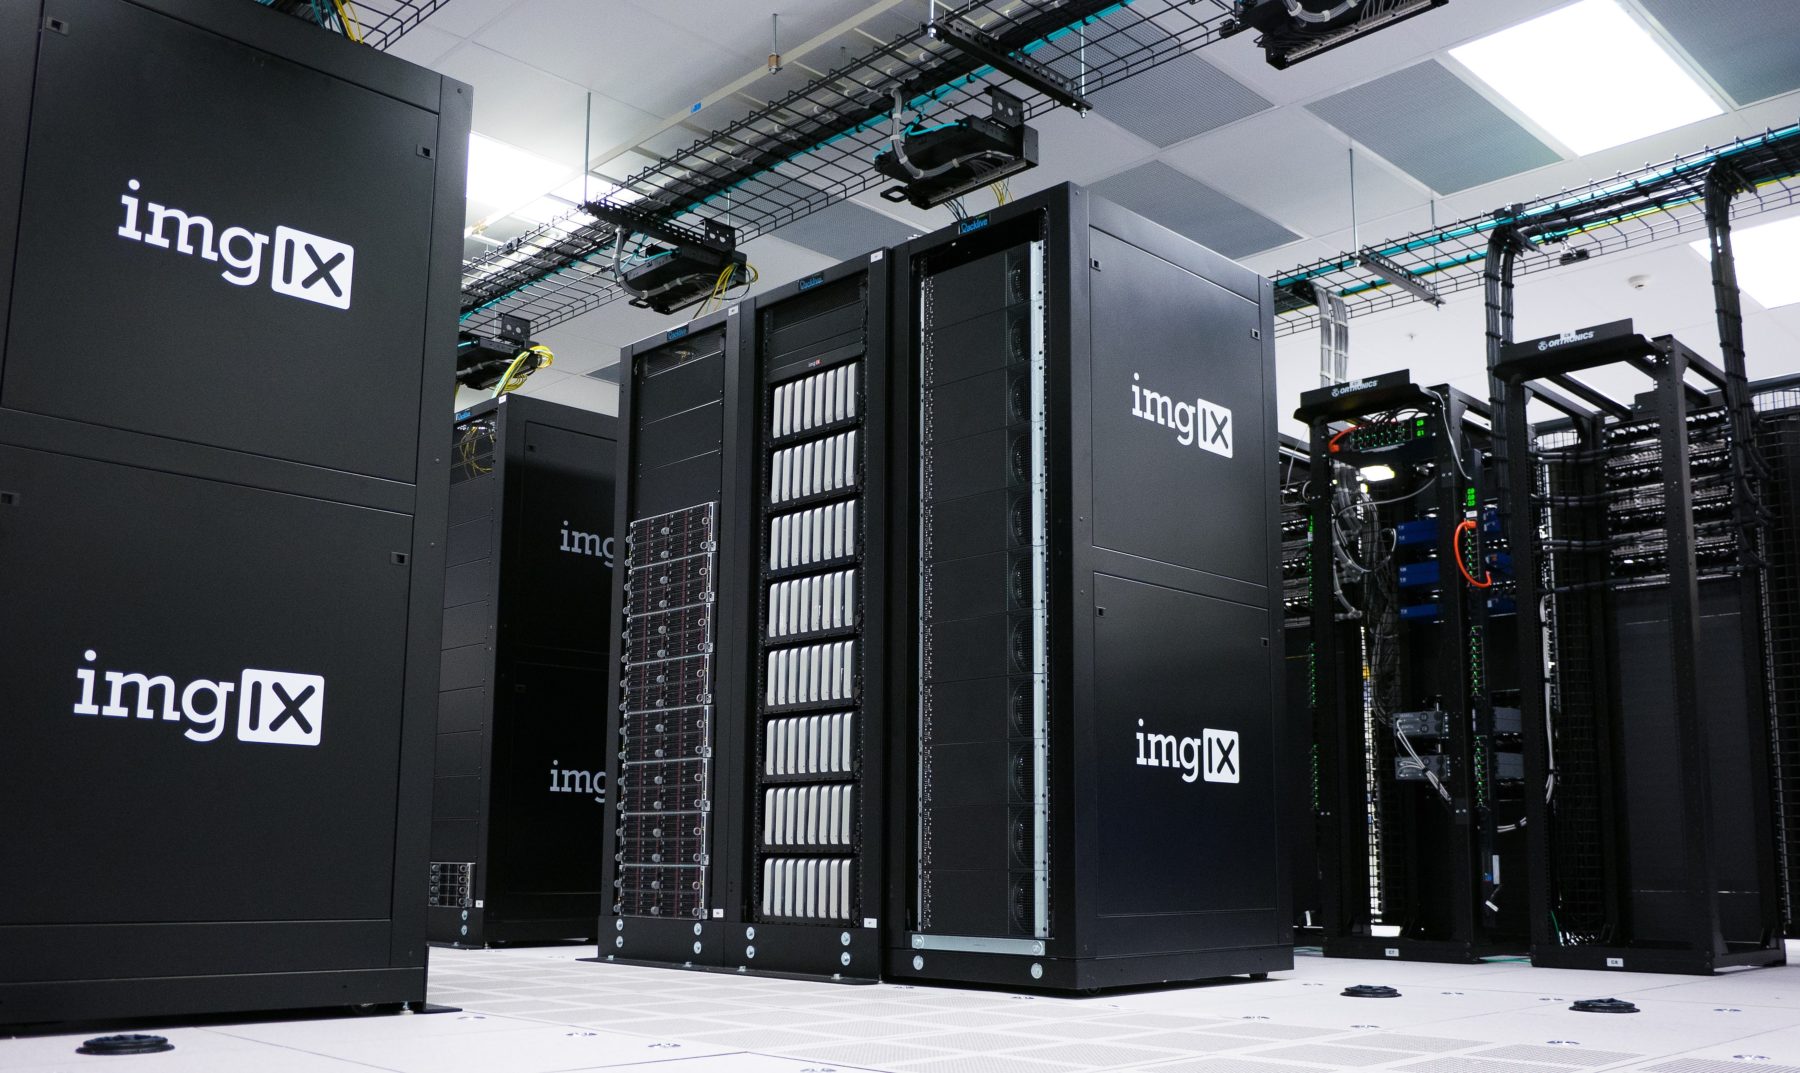 A row of data servers.